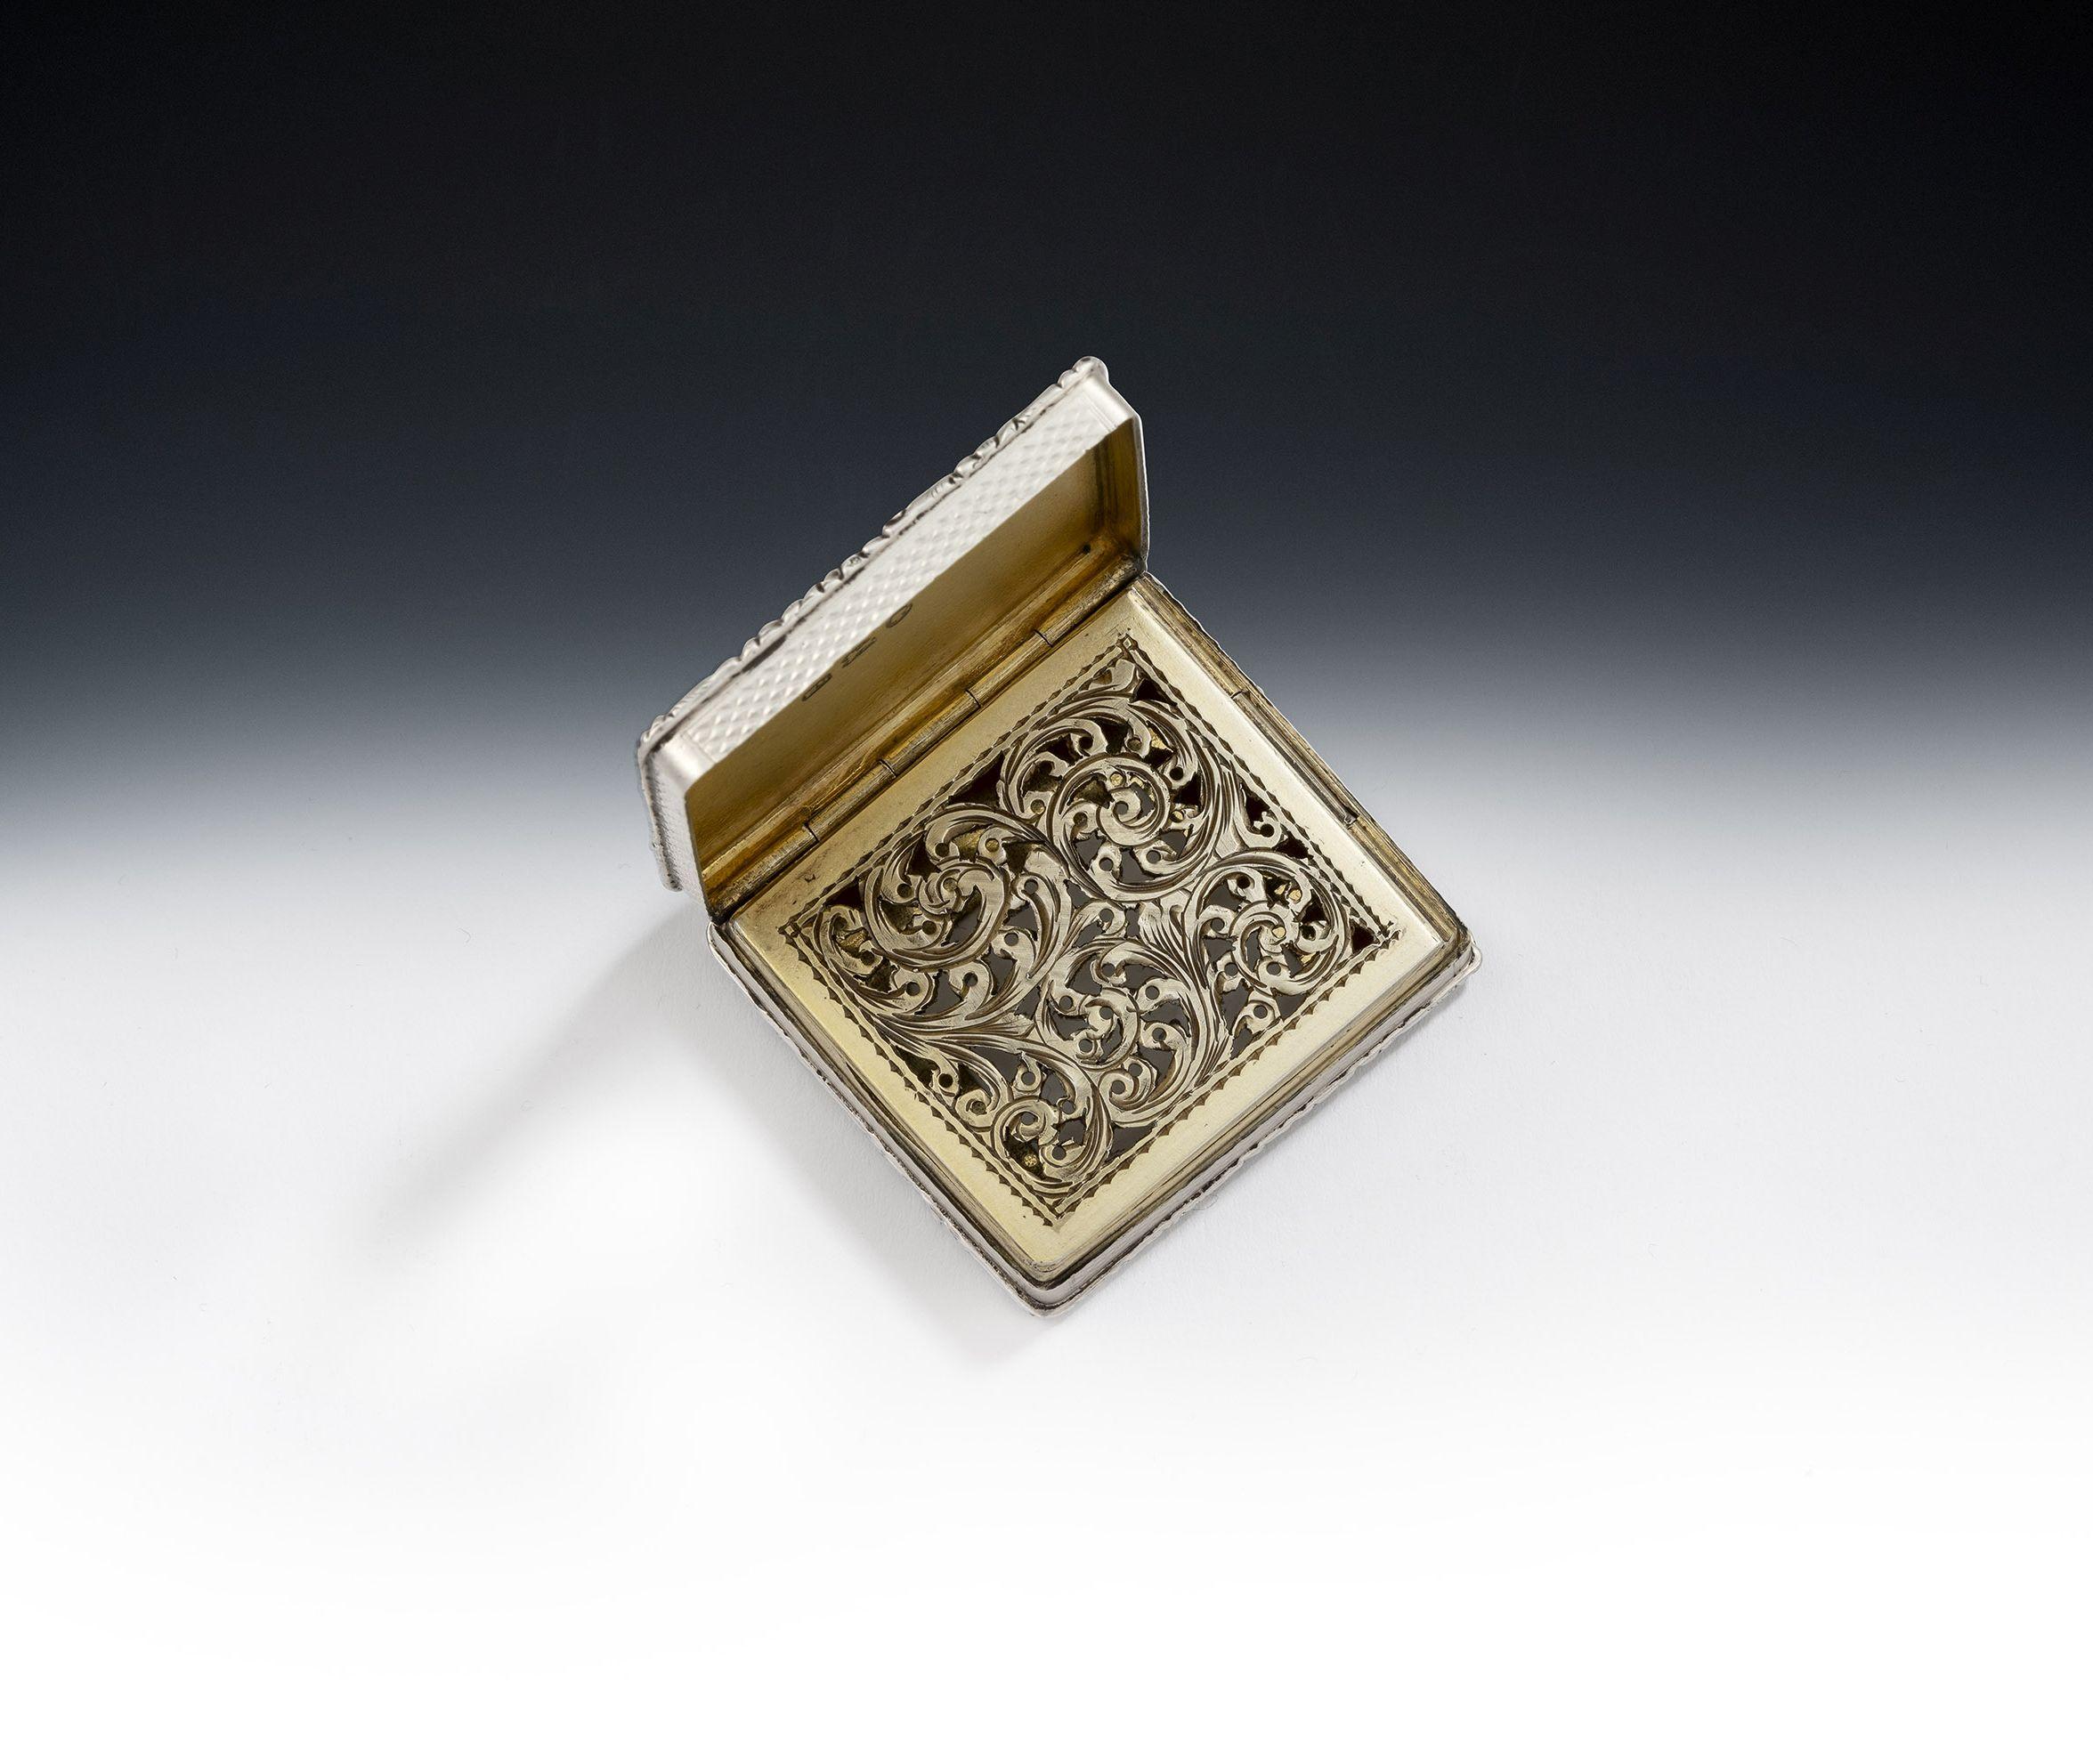 A very fine & unusual cased vinaigrette made in Birmingham in 1845 by Edward Smith

This exceptional example is modelled in an unusual, almost square, form with a cast foliate frame on the cover and the base.  Both the base, sides and cover are